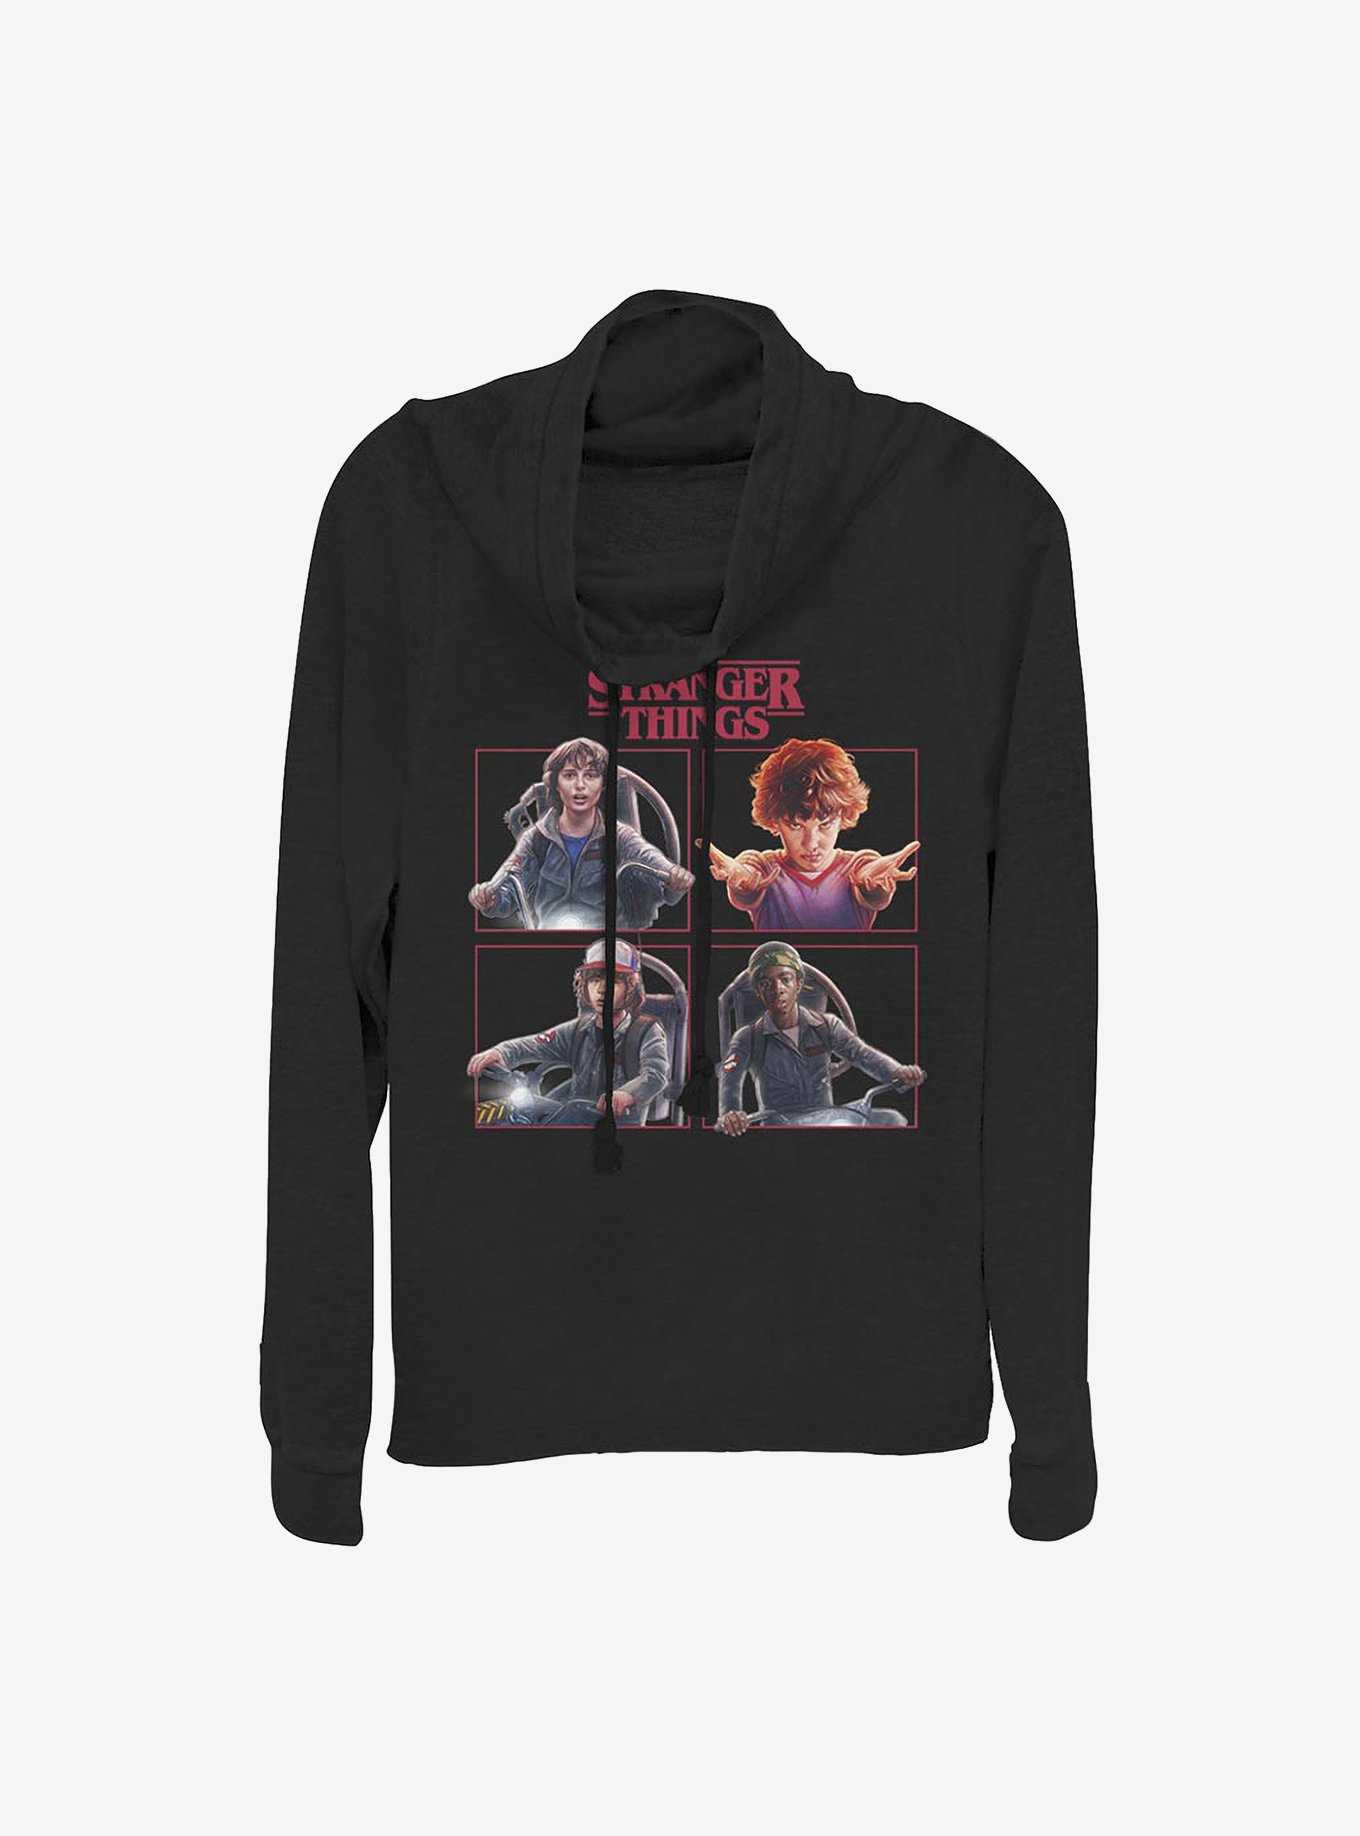 Stranger Things Cast Box Up Cowlneck Long-Sleeve Girls Top, , hi-res